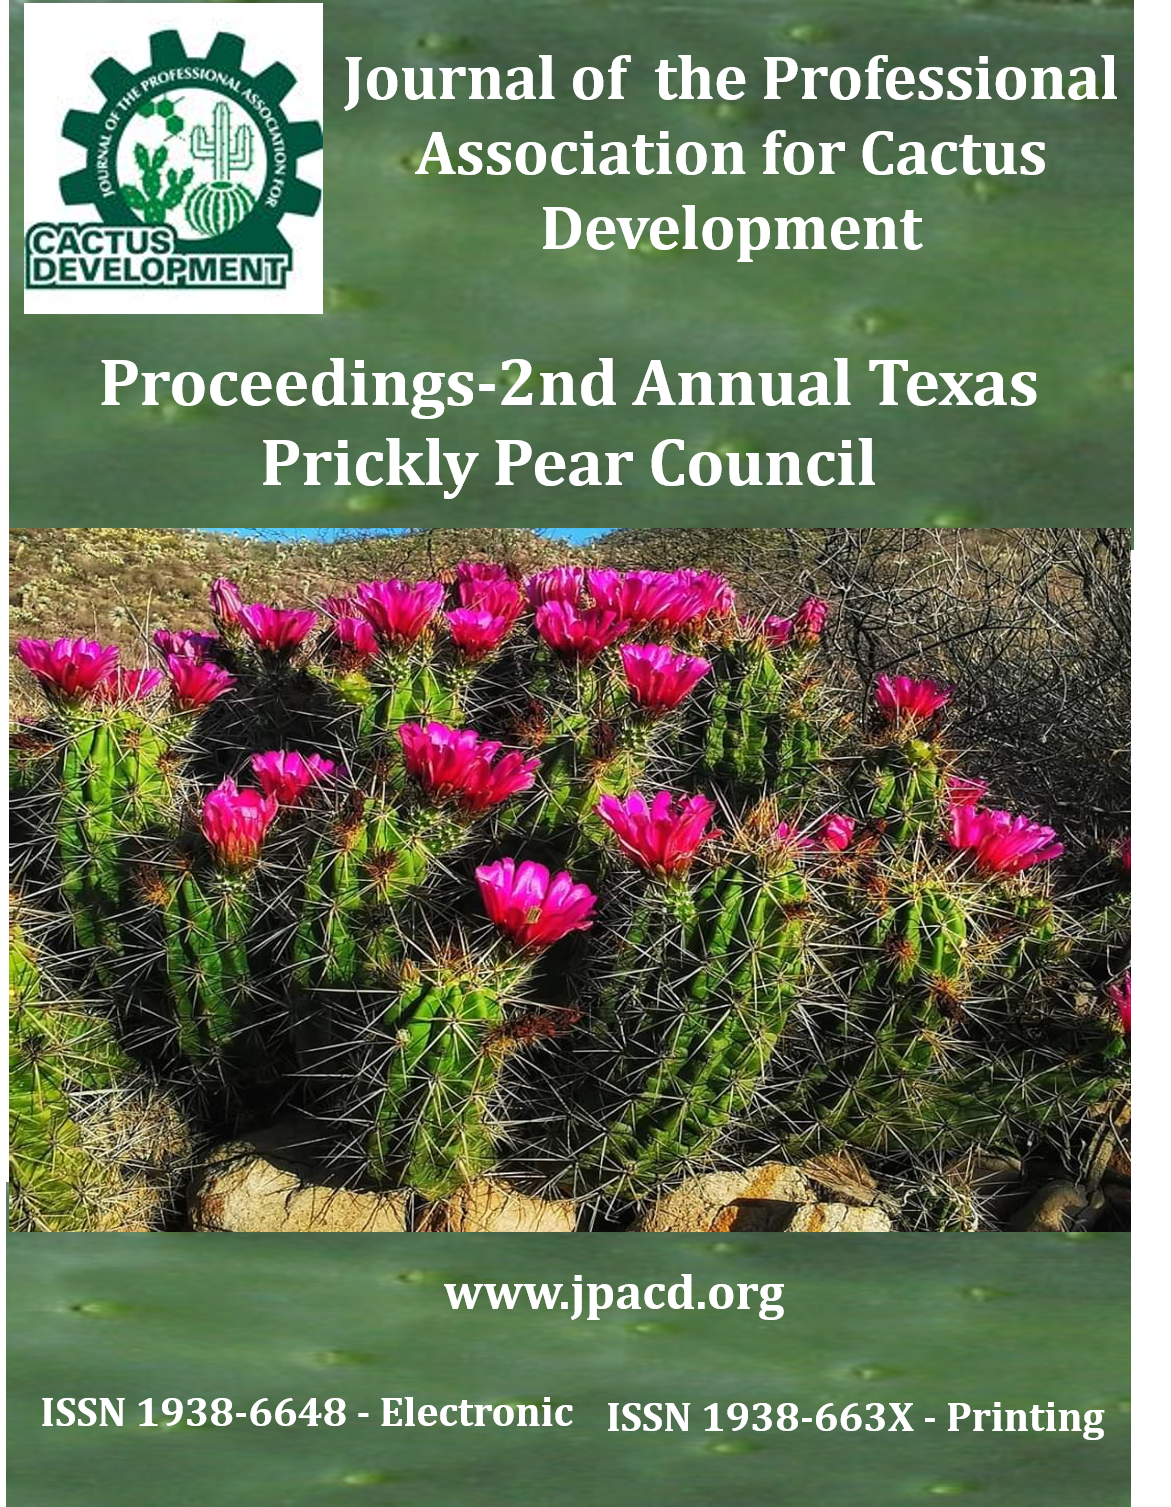 					View 1991: Proceedings-2nd Annual Texas Prickly Pear Council
				